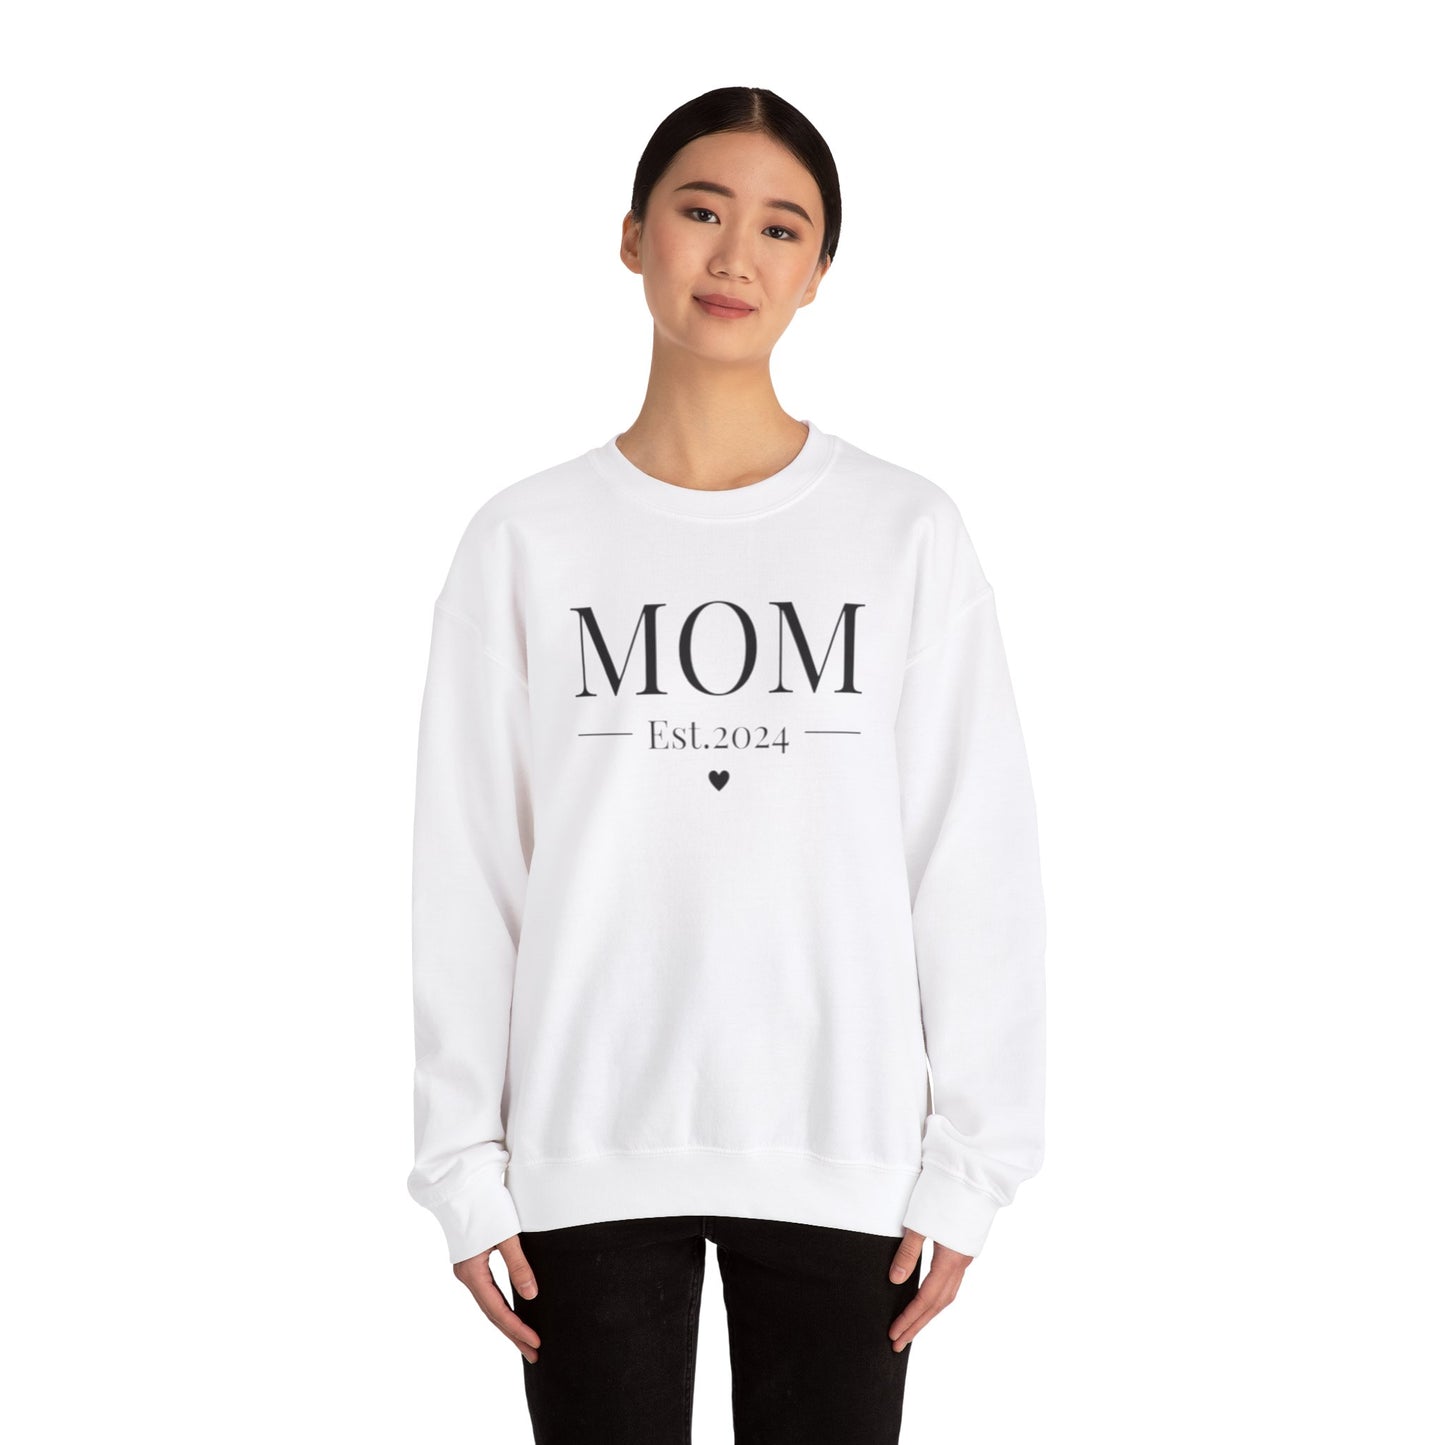 Mom 2024 Crewneck Sweatshirt (available as a tank top $17 or T-Shirt $20 too!)